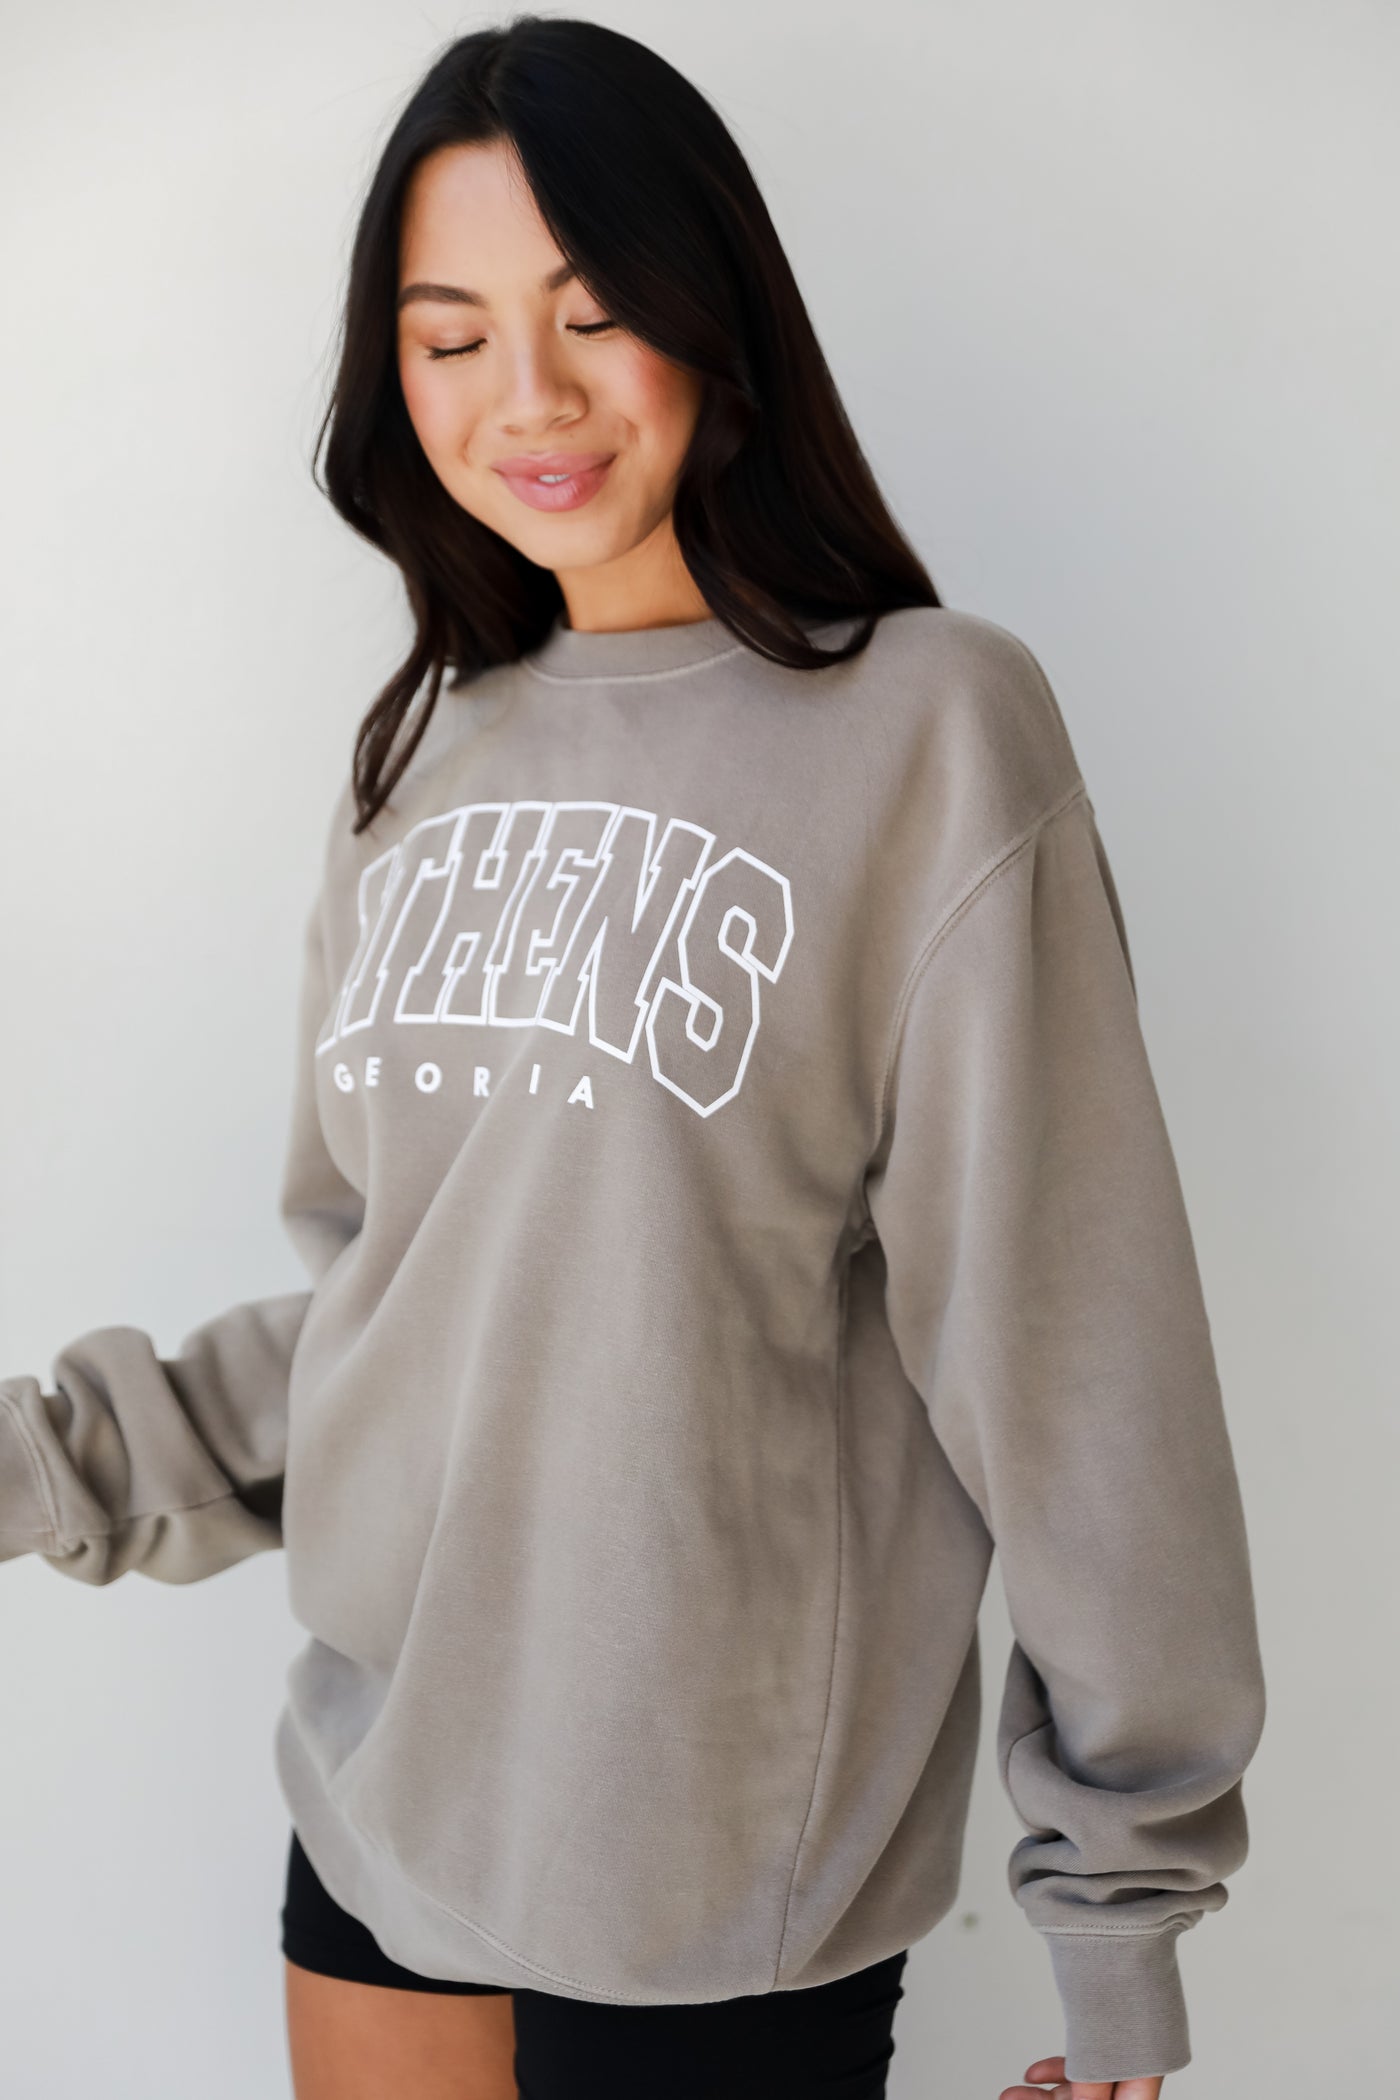 grey Athens Georgia Pullover side view